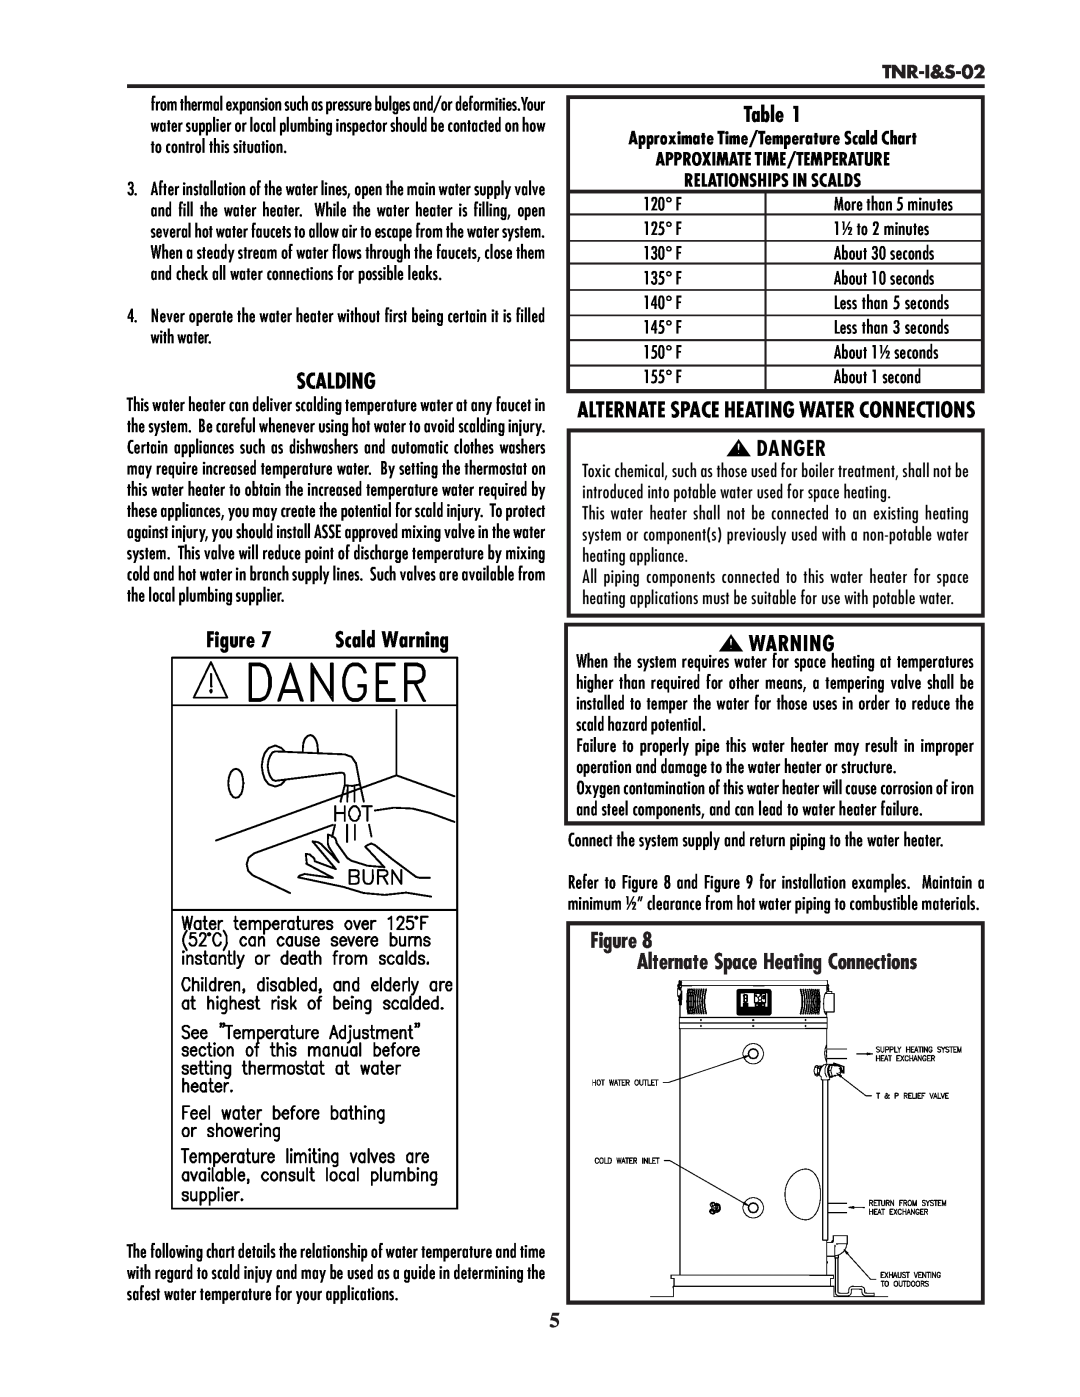 Lochinvar TNR-I&S-02 service manual Scalding, Approximate Time/Temperature Scald Chart, Relationships In Scalds, Danger 